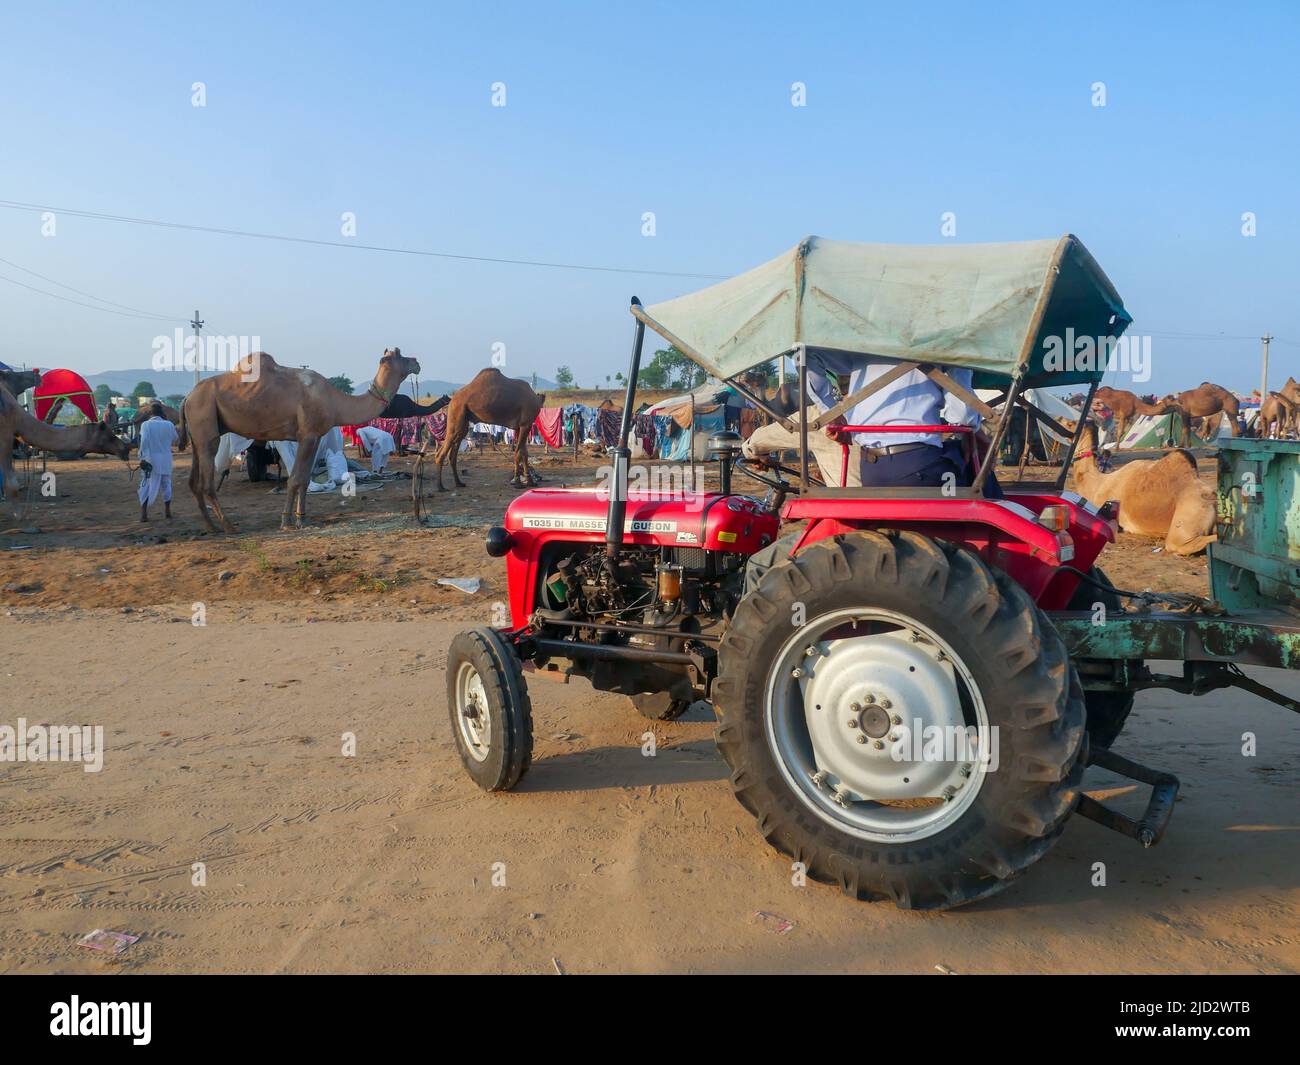 Pushkar, Rajasthan India - November 04, 2019 : Tractor running on road in Indian countryside areas. Tractor is mode of transportation in villages Stock Photo